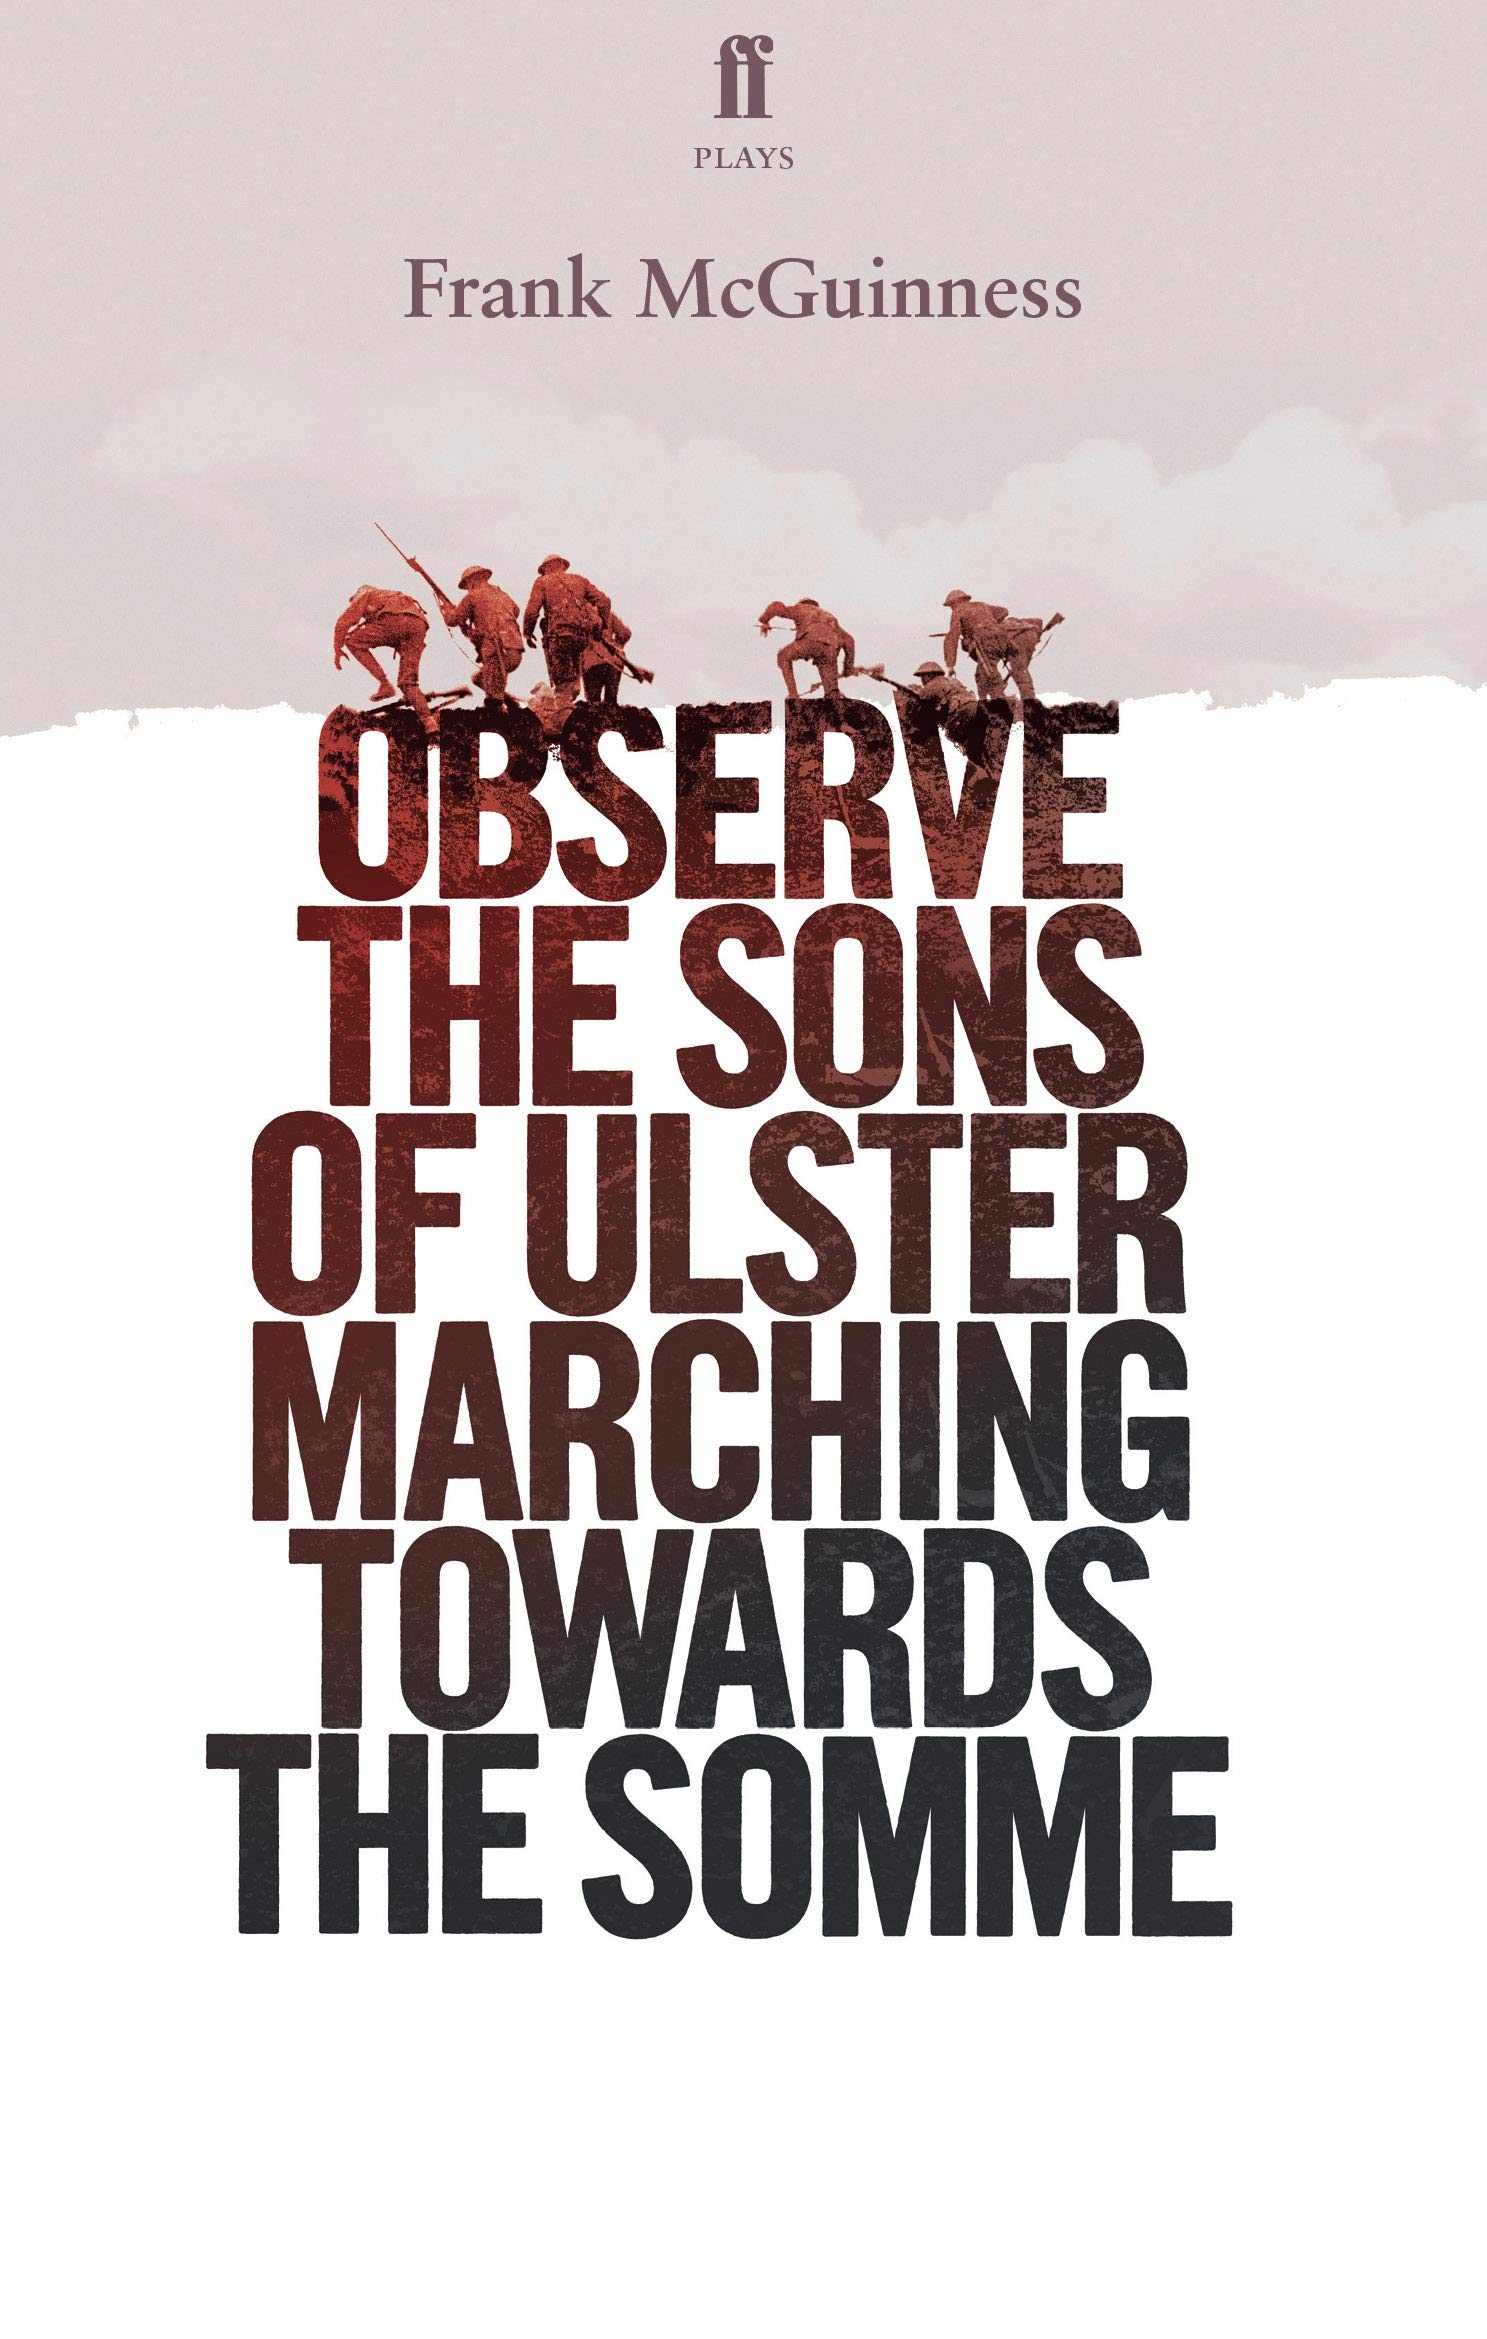 Observe The Sons of Ulster Marching Towards The Somme by Frank McGuiness